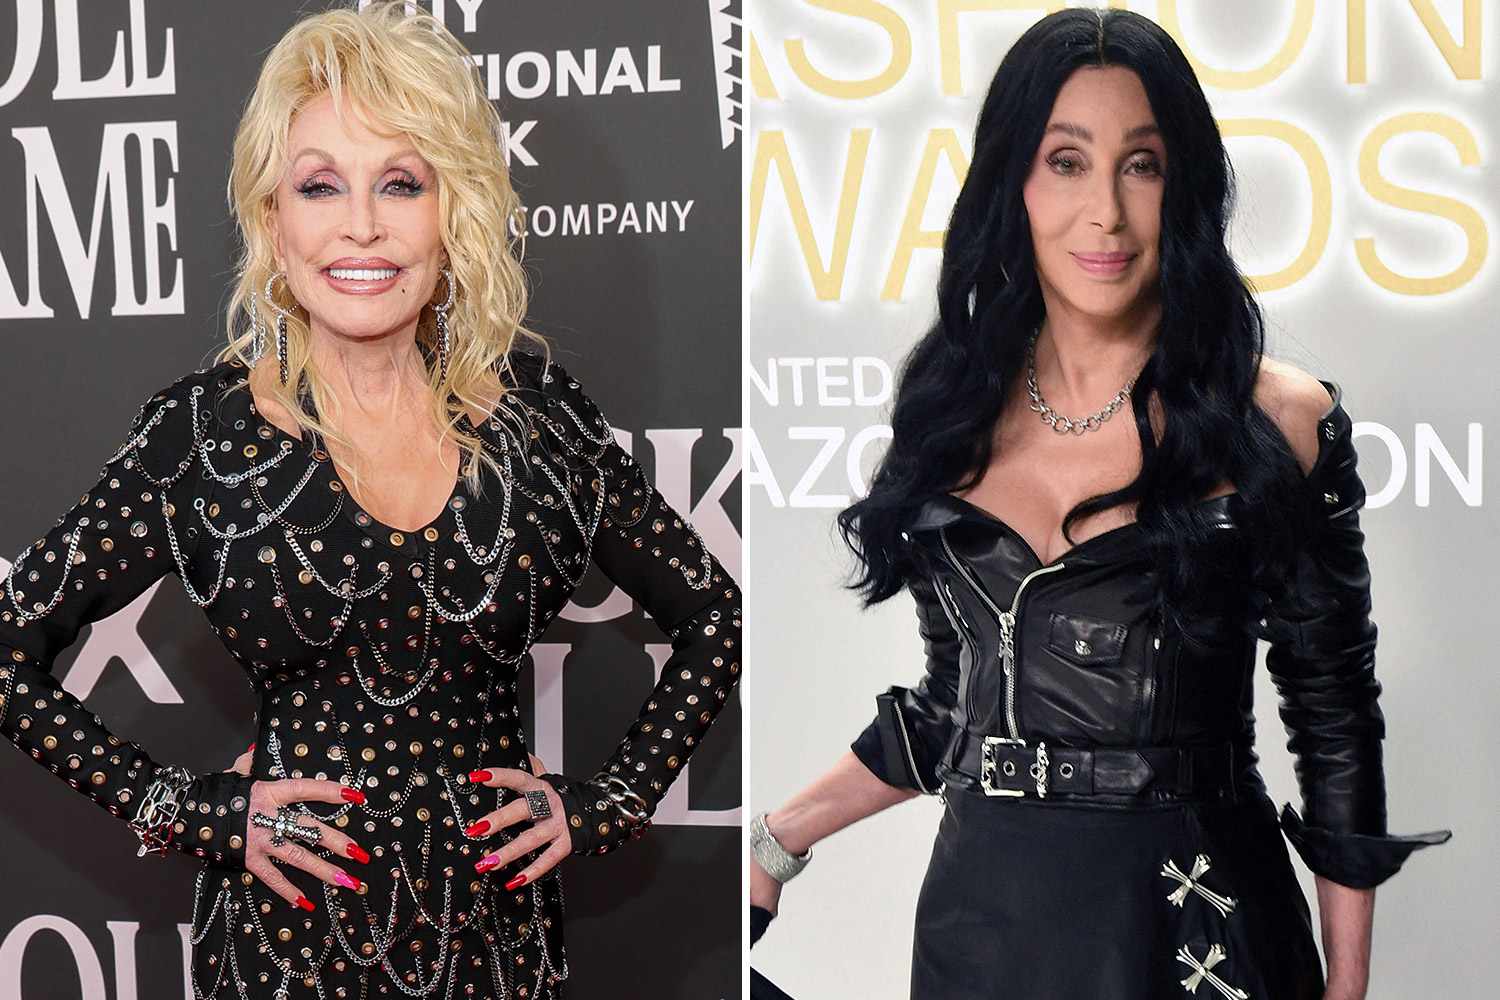 You Won't Believe How Dolly Parton And Cher's Hair Looks Without A Wing!